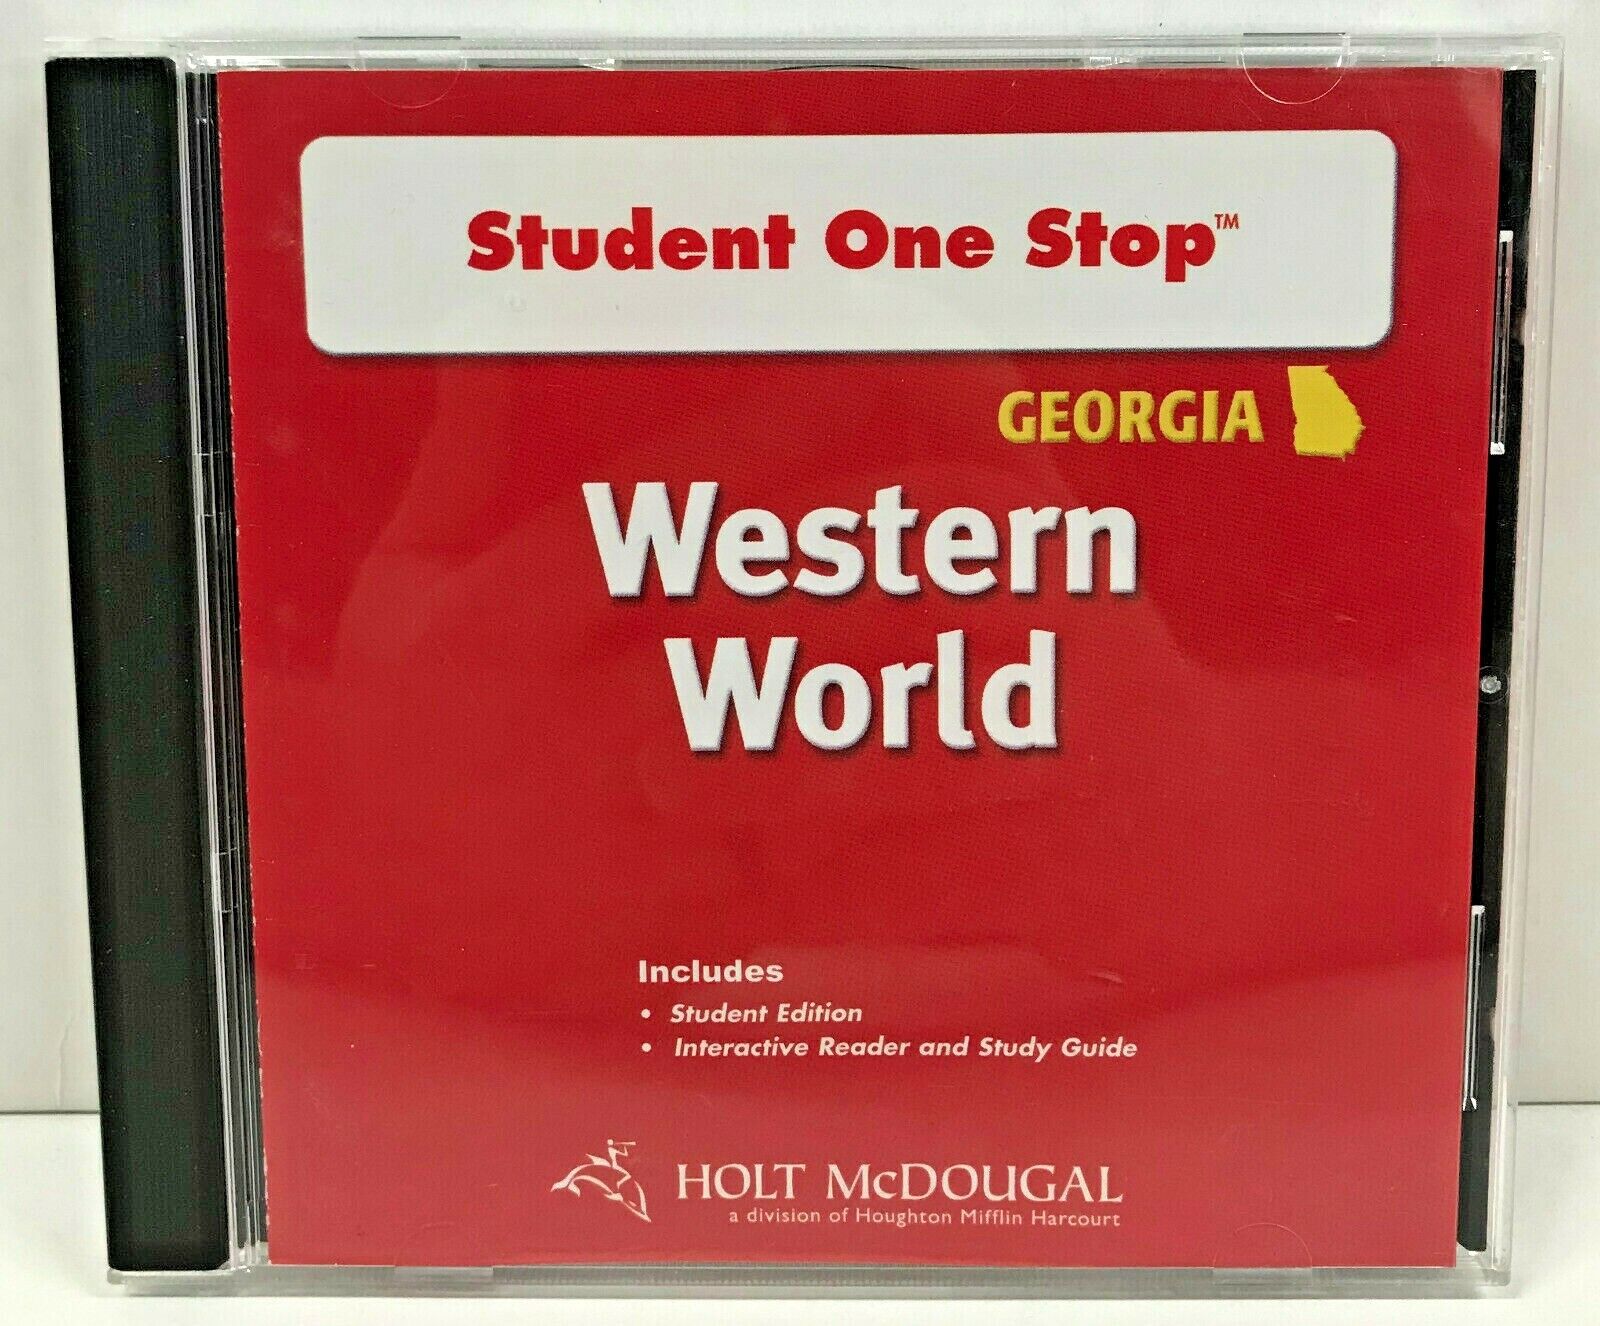 Student One Stop Georgia Western World Student Edition Holt McDougal (DVD-ROM)